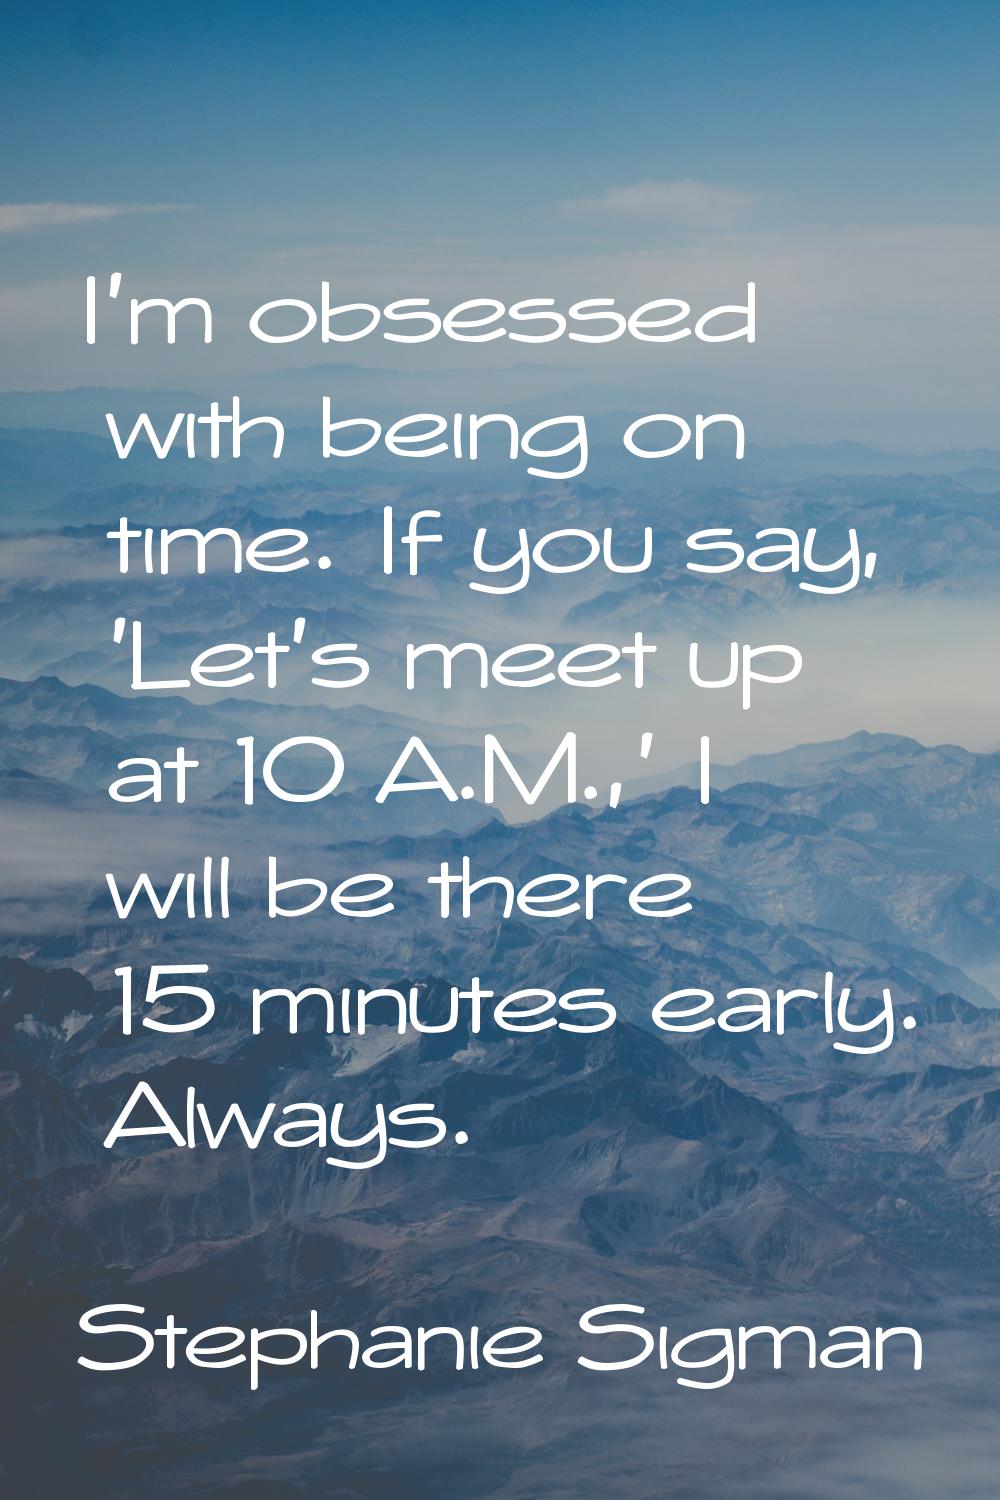 I'm obsessed with being on time. If you say, 'Let's meet up at 10 A.M.,' I will be there 15 minutes